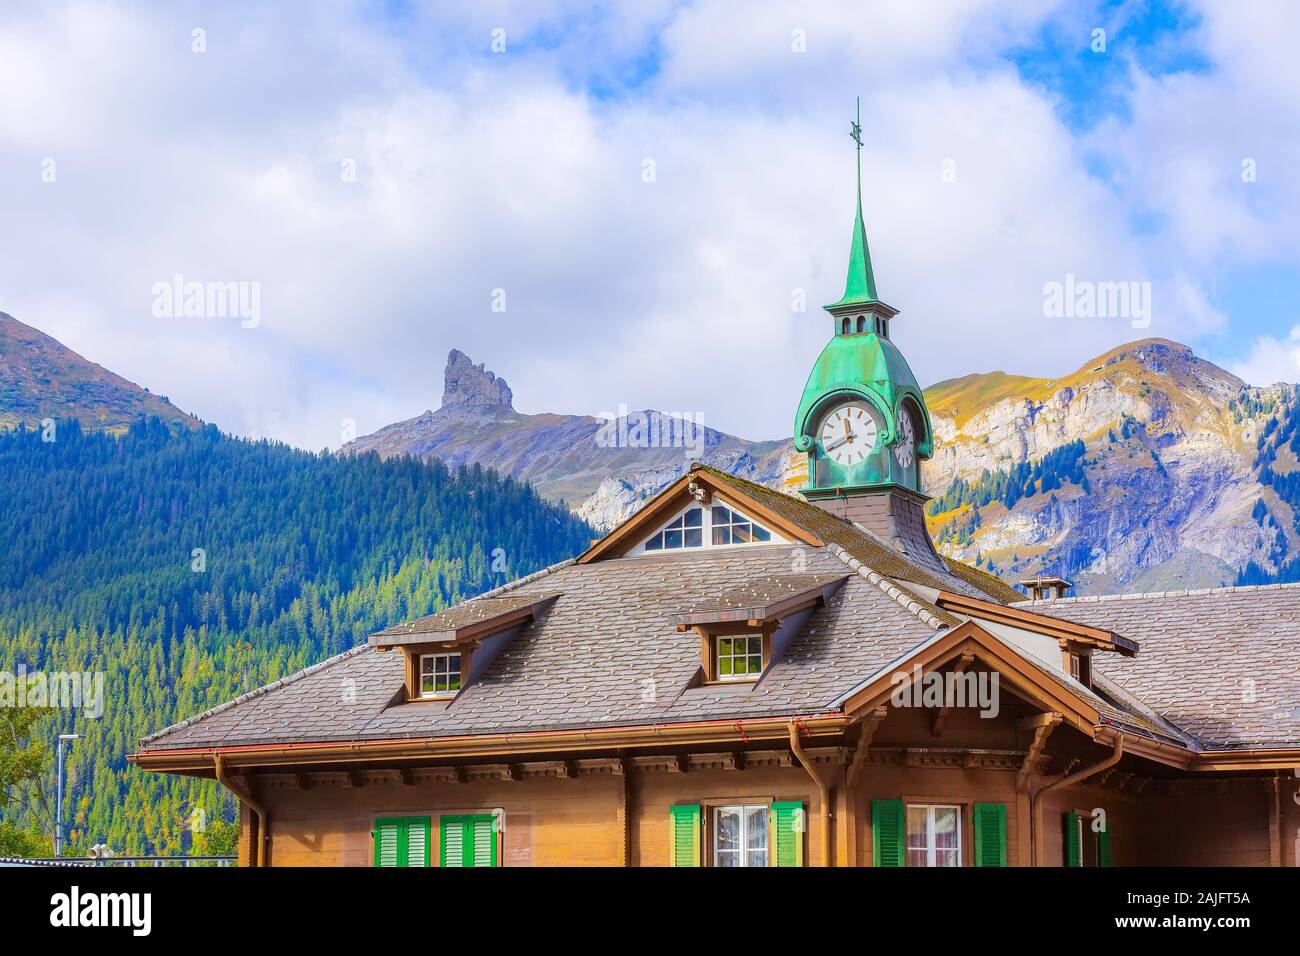 Wengen, Switzerland railway train station old wooden house with clock tower Stock Photo